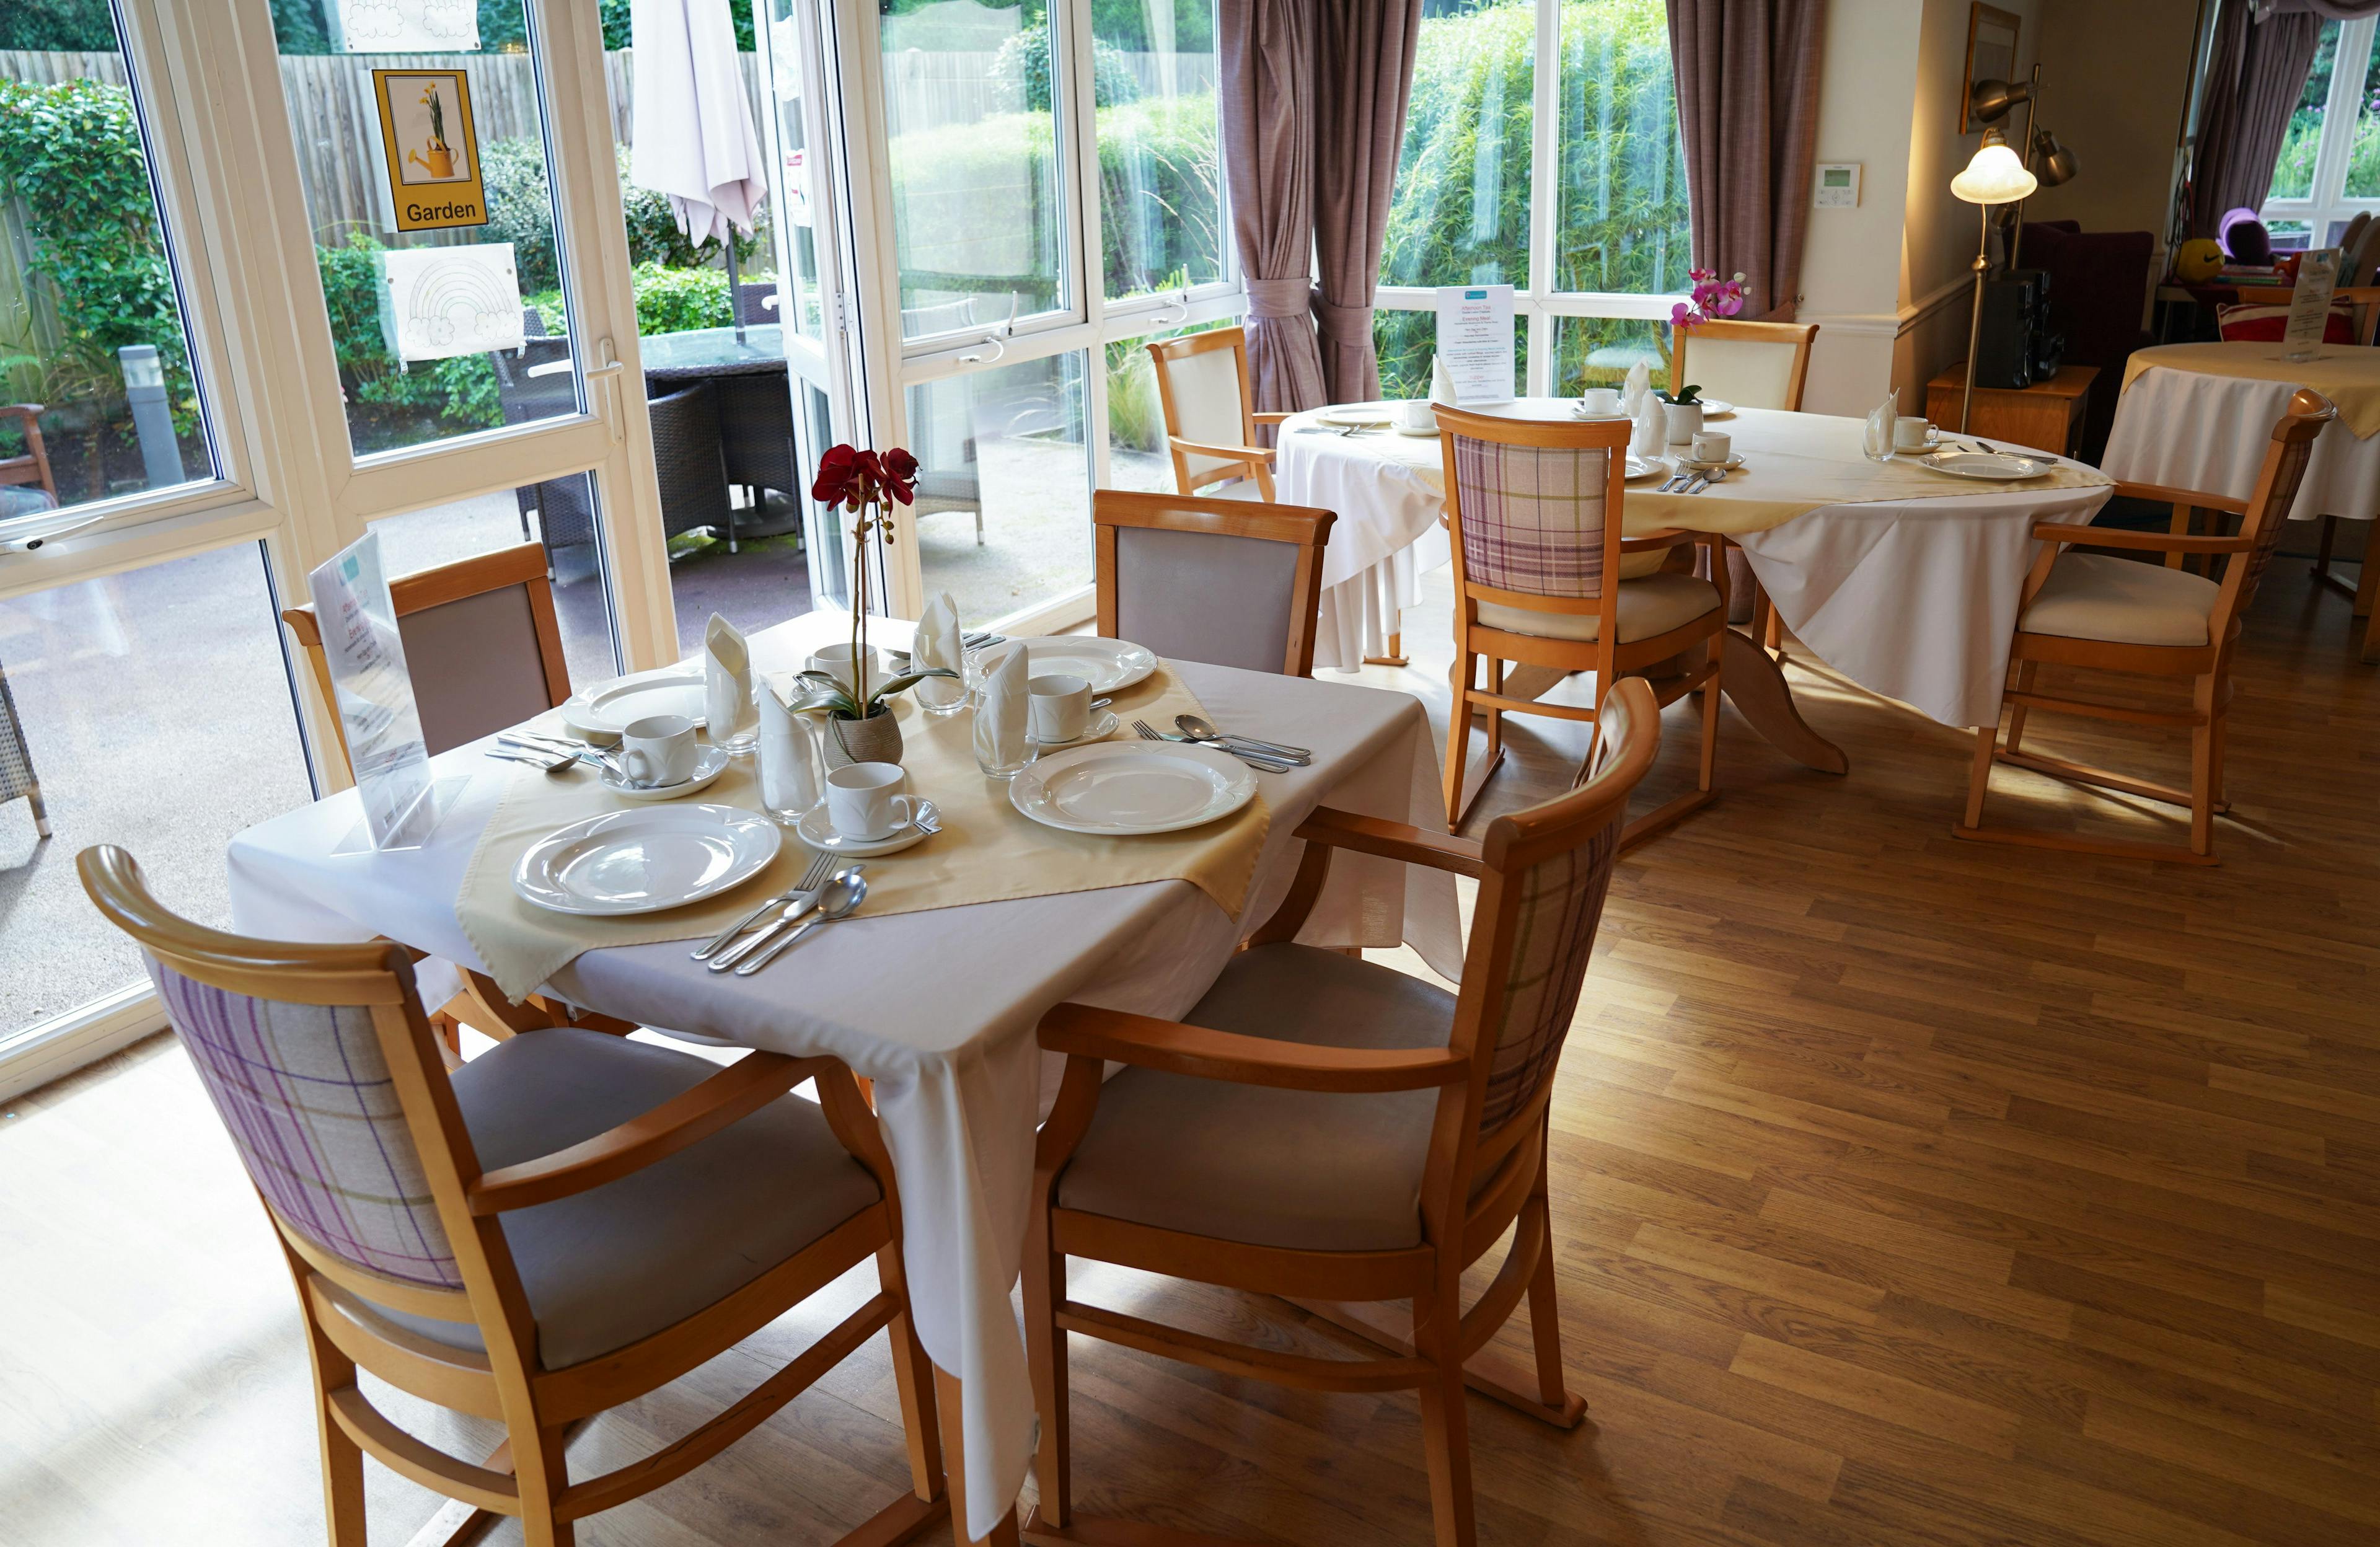 Dining room of Haven care home in Pinner, London